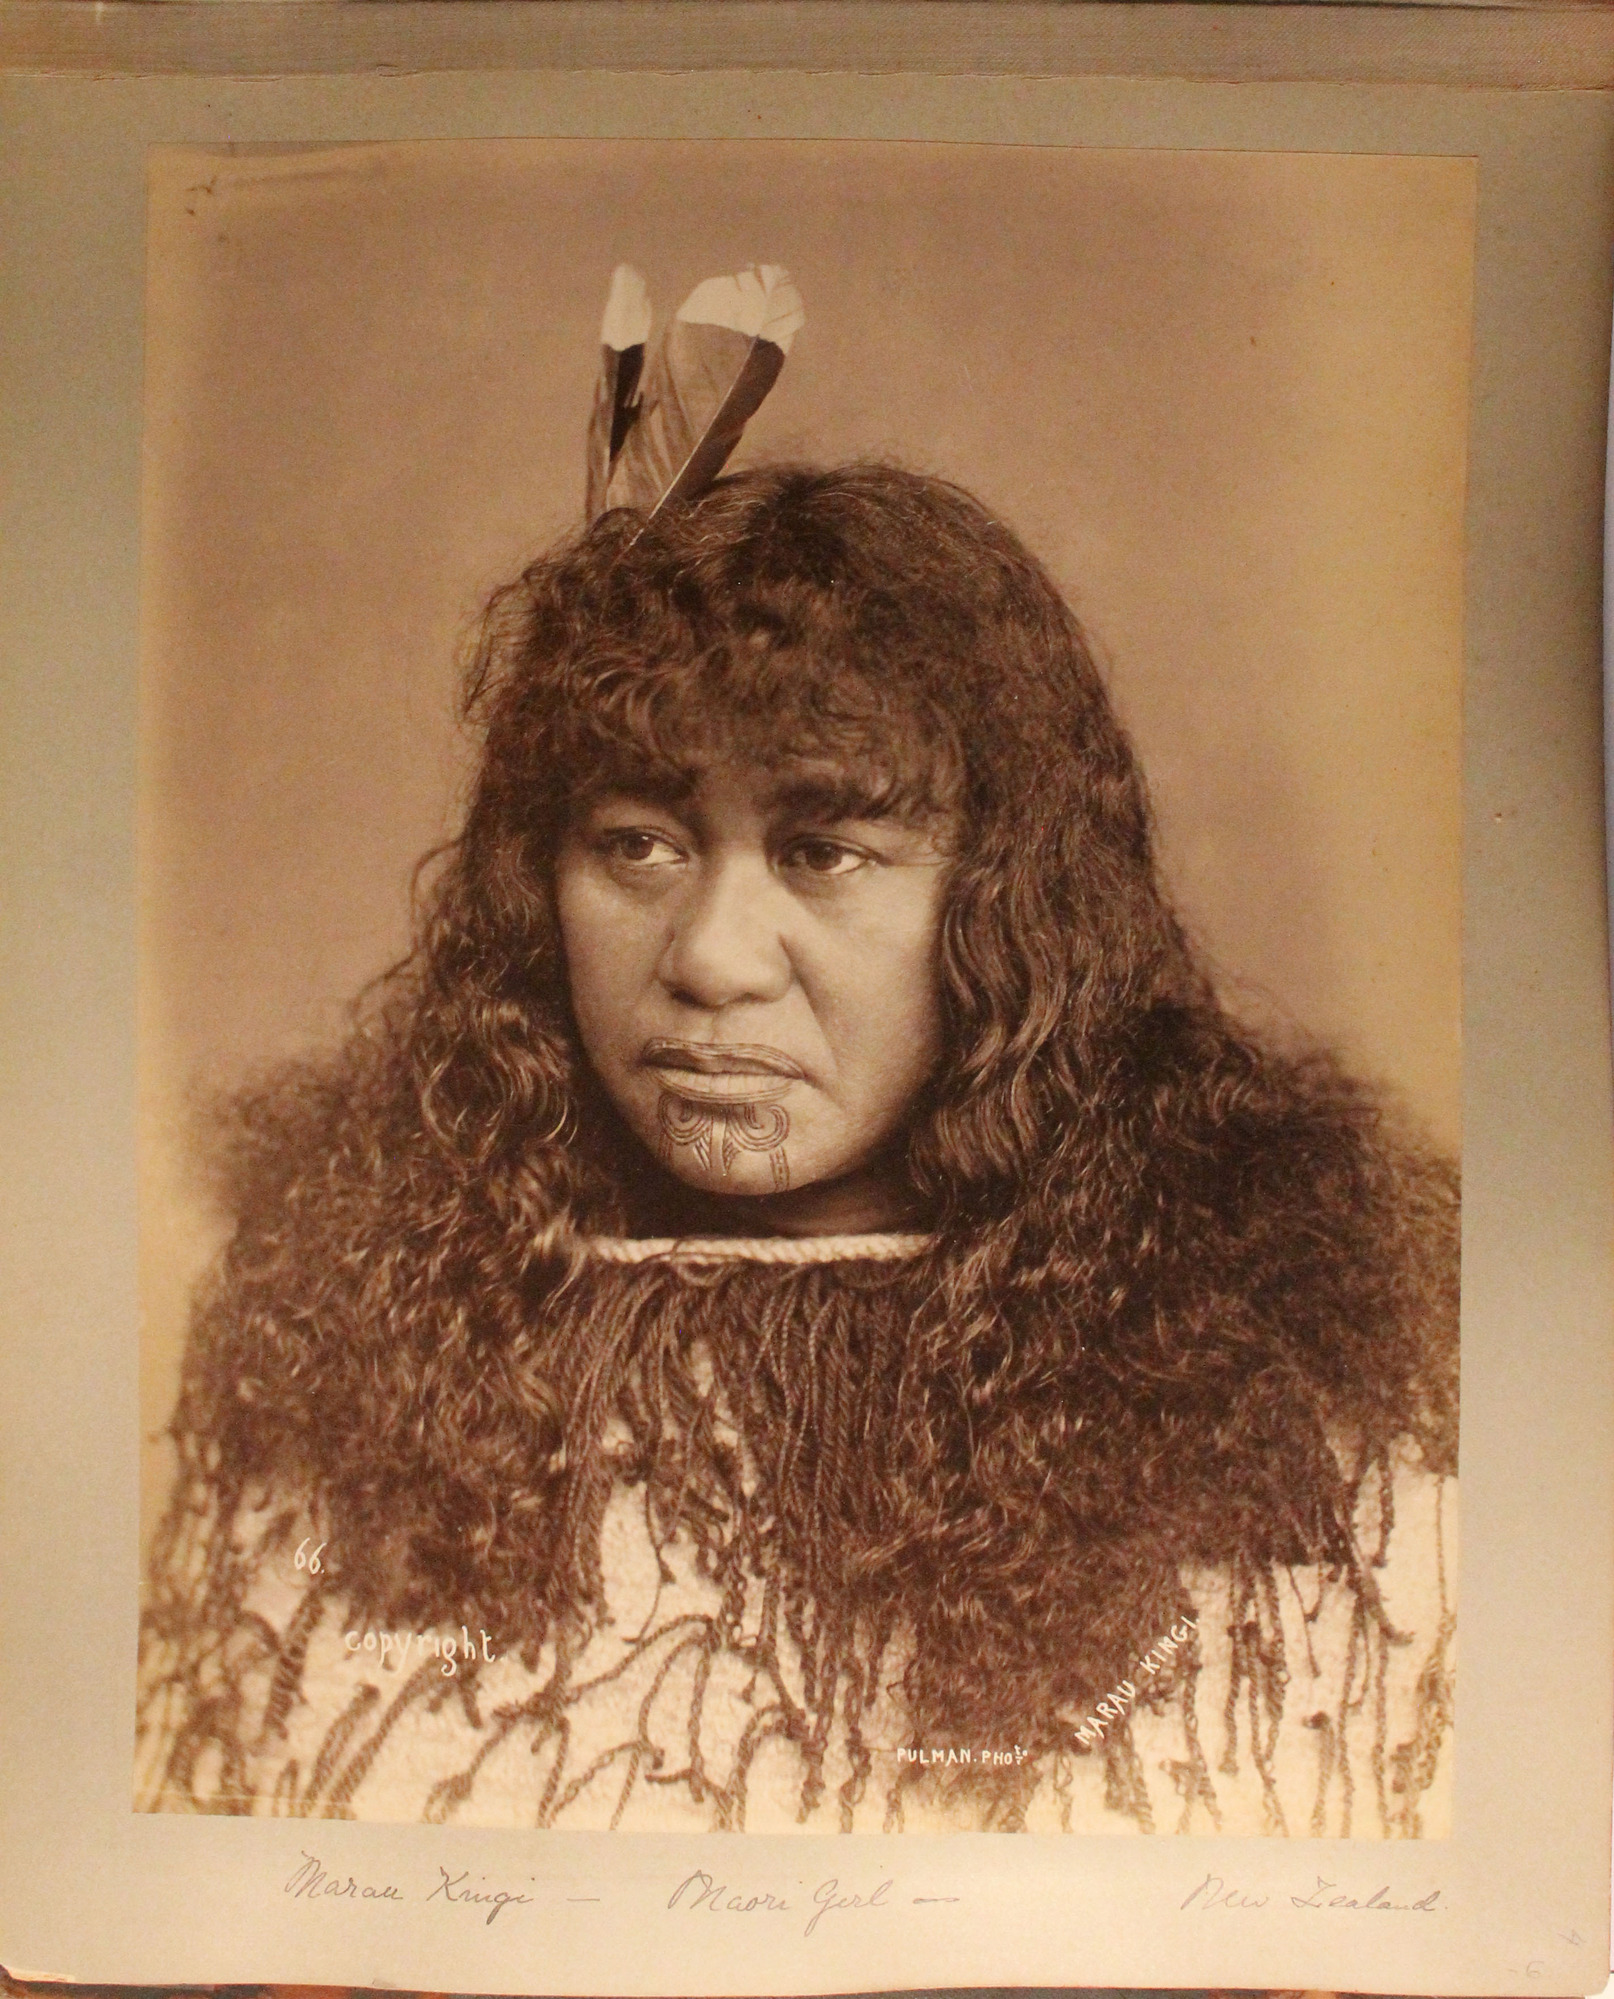 Portrait of Maori woman with traditional feathers and mouth tattoos.